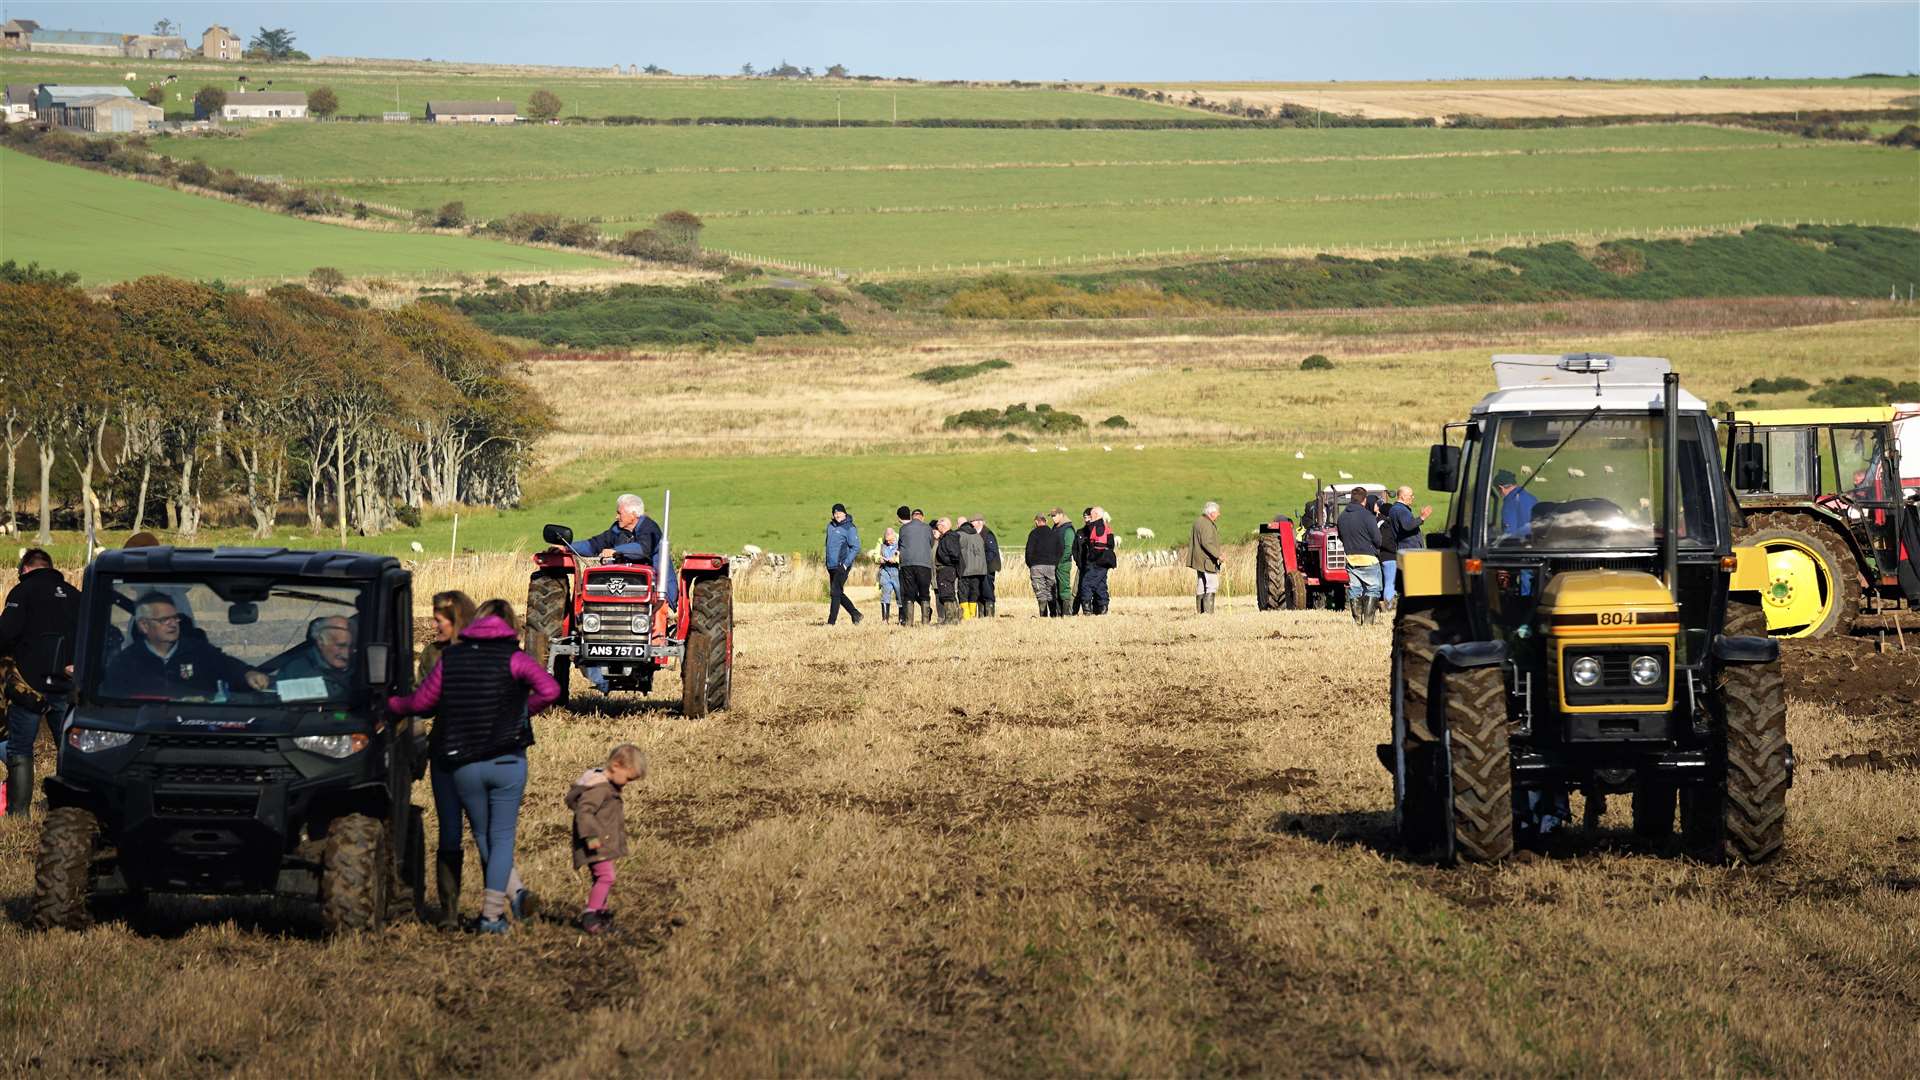 The tractors retire from the field after a busy day ploughing. Picture: DGS